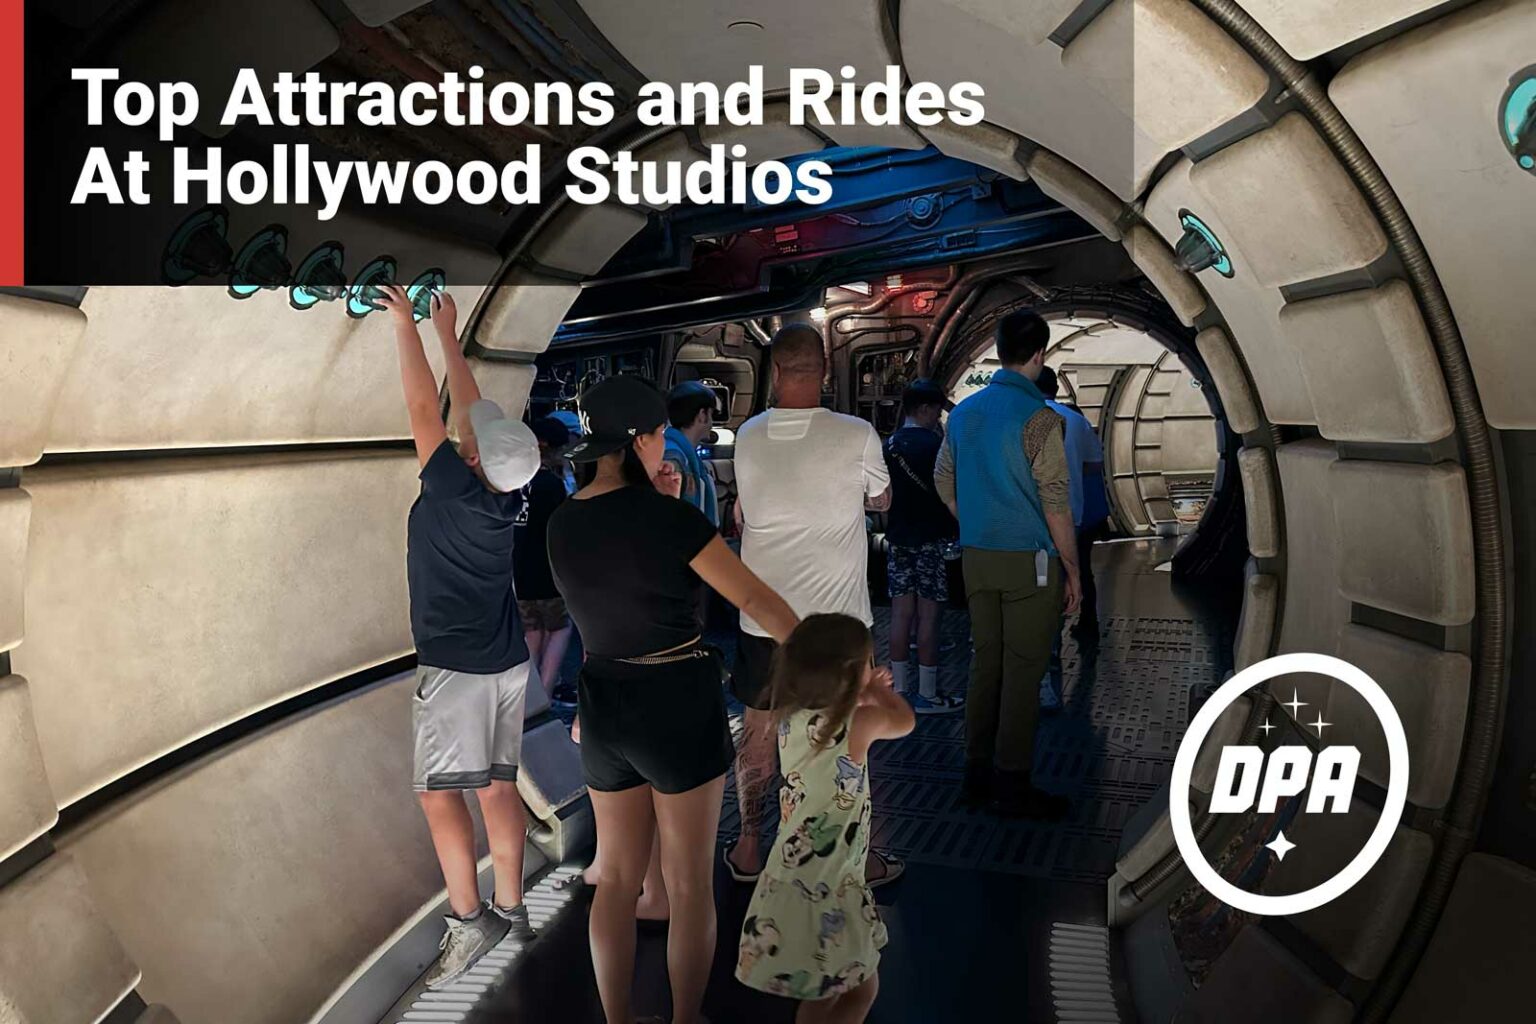 Smuggler's Run at Disney's Hollywood Studios is Every Star Wars fan's dream ride